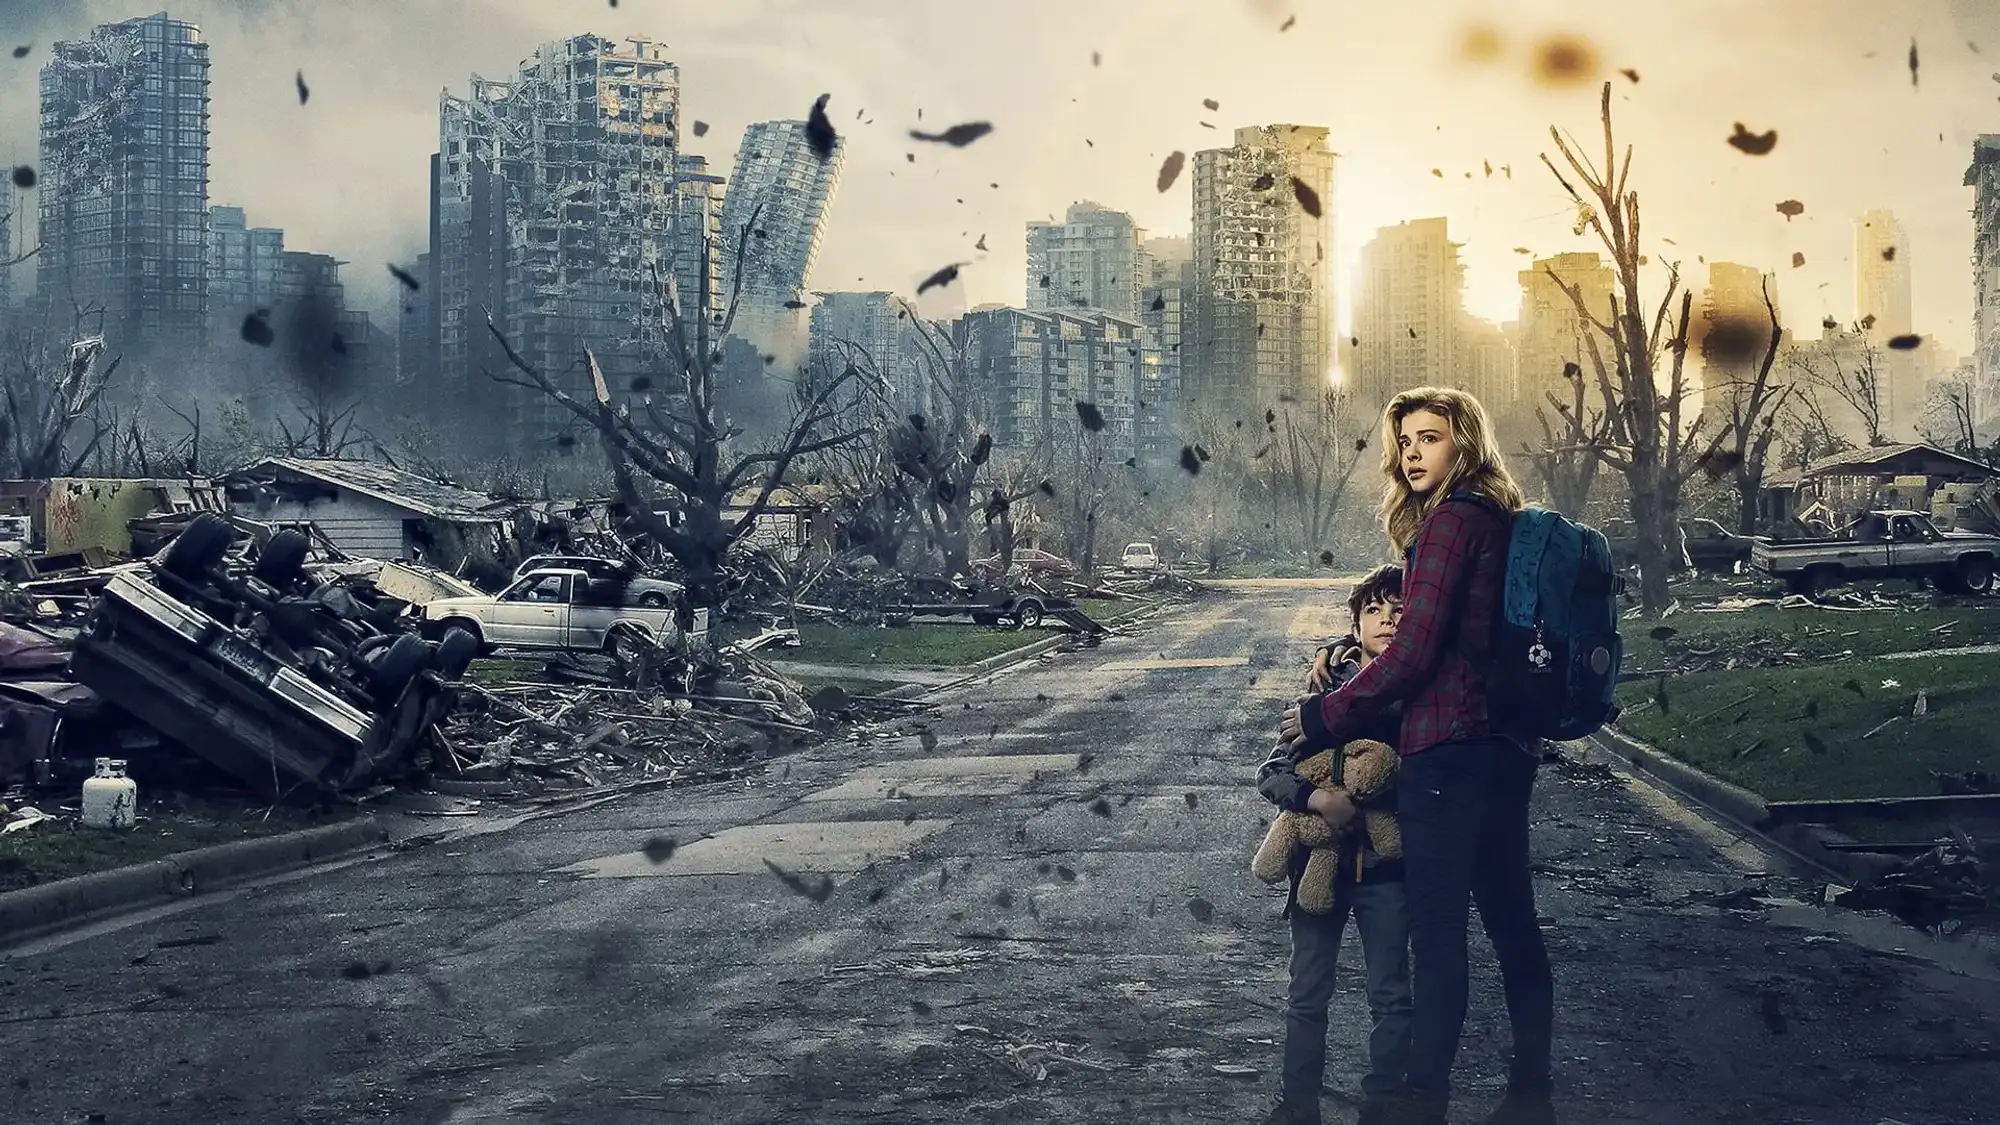 The 5th Wave movie review